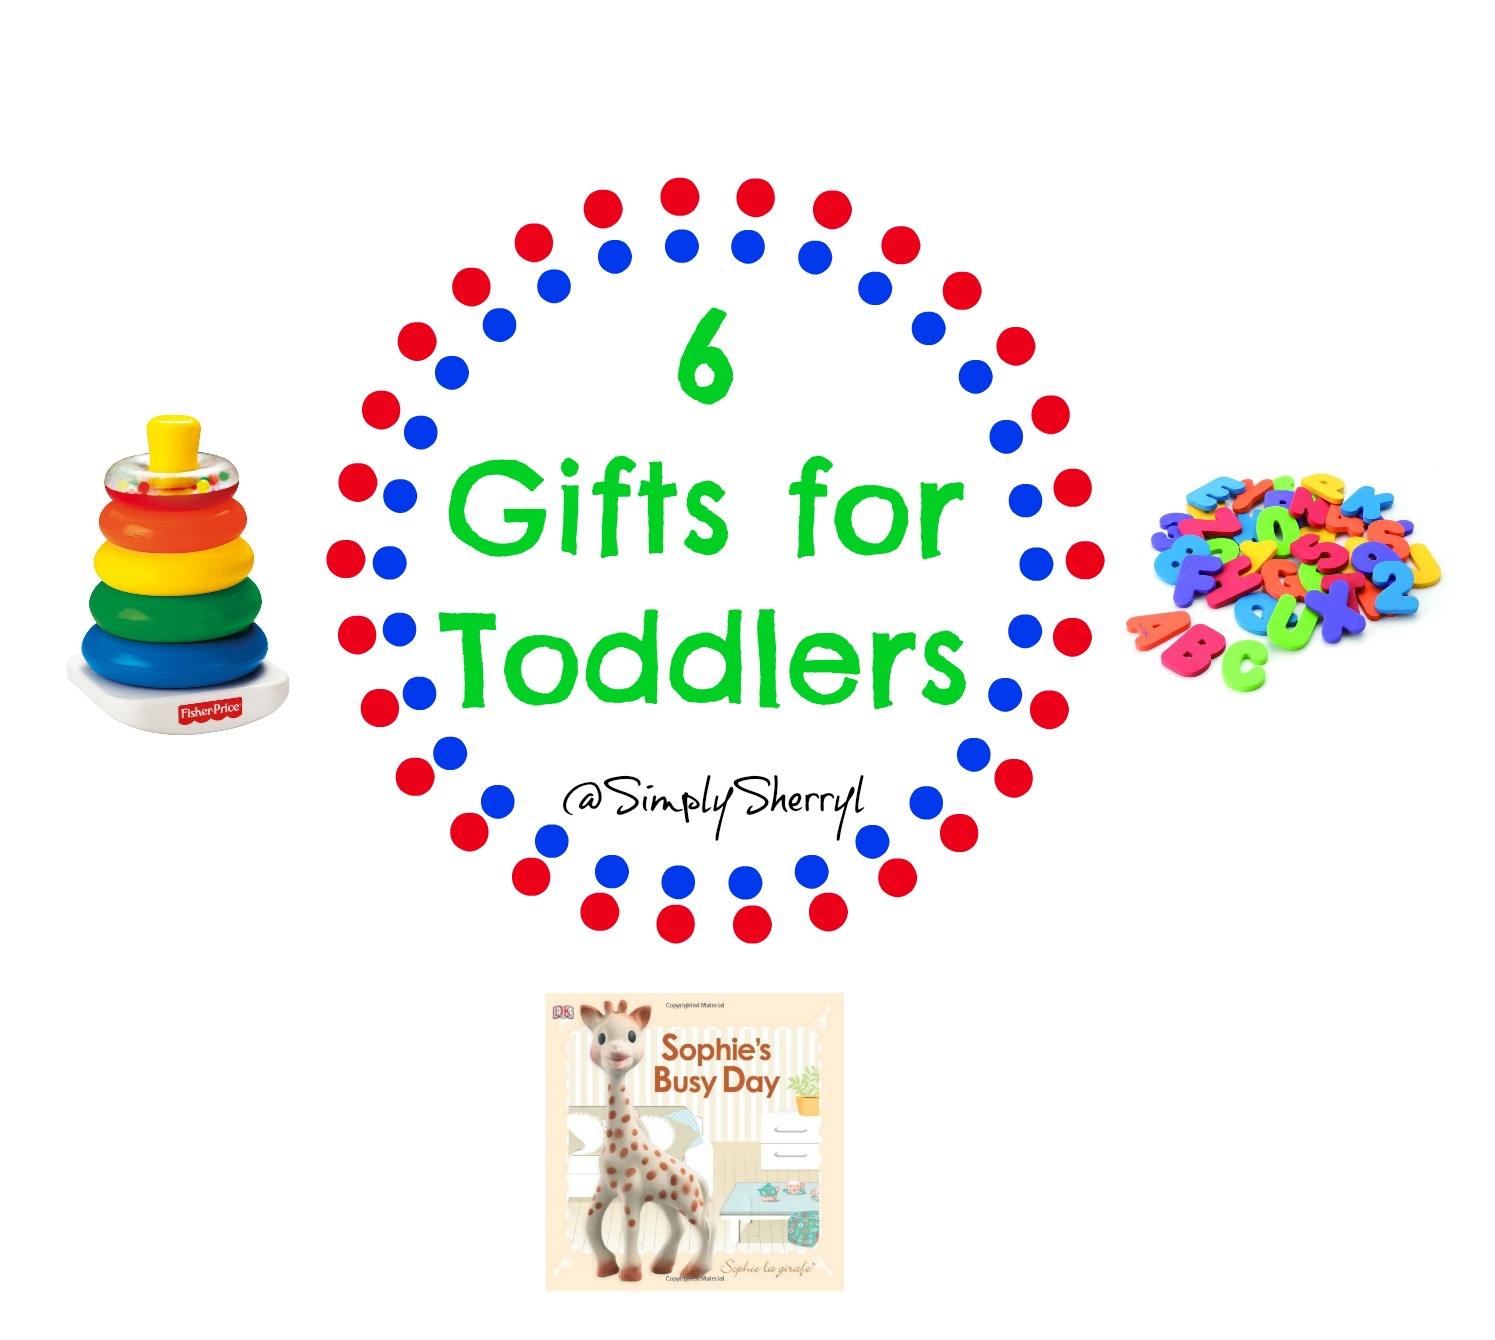 Six Gifts for Toddlers